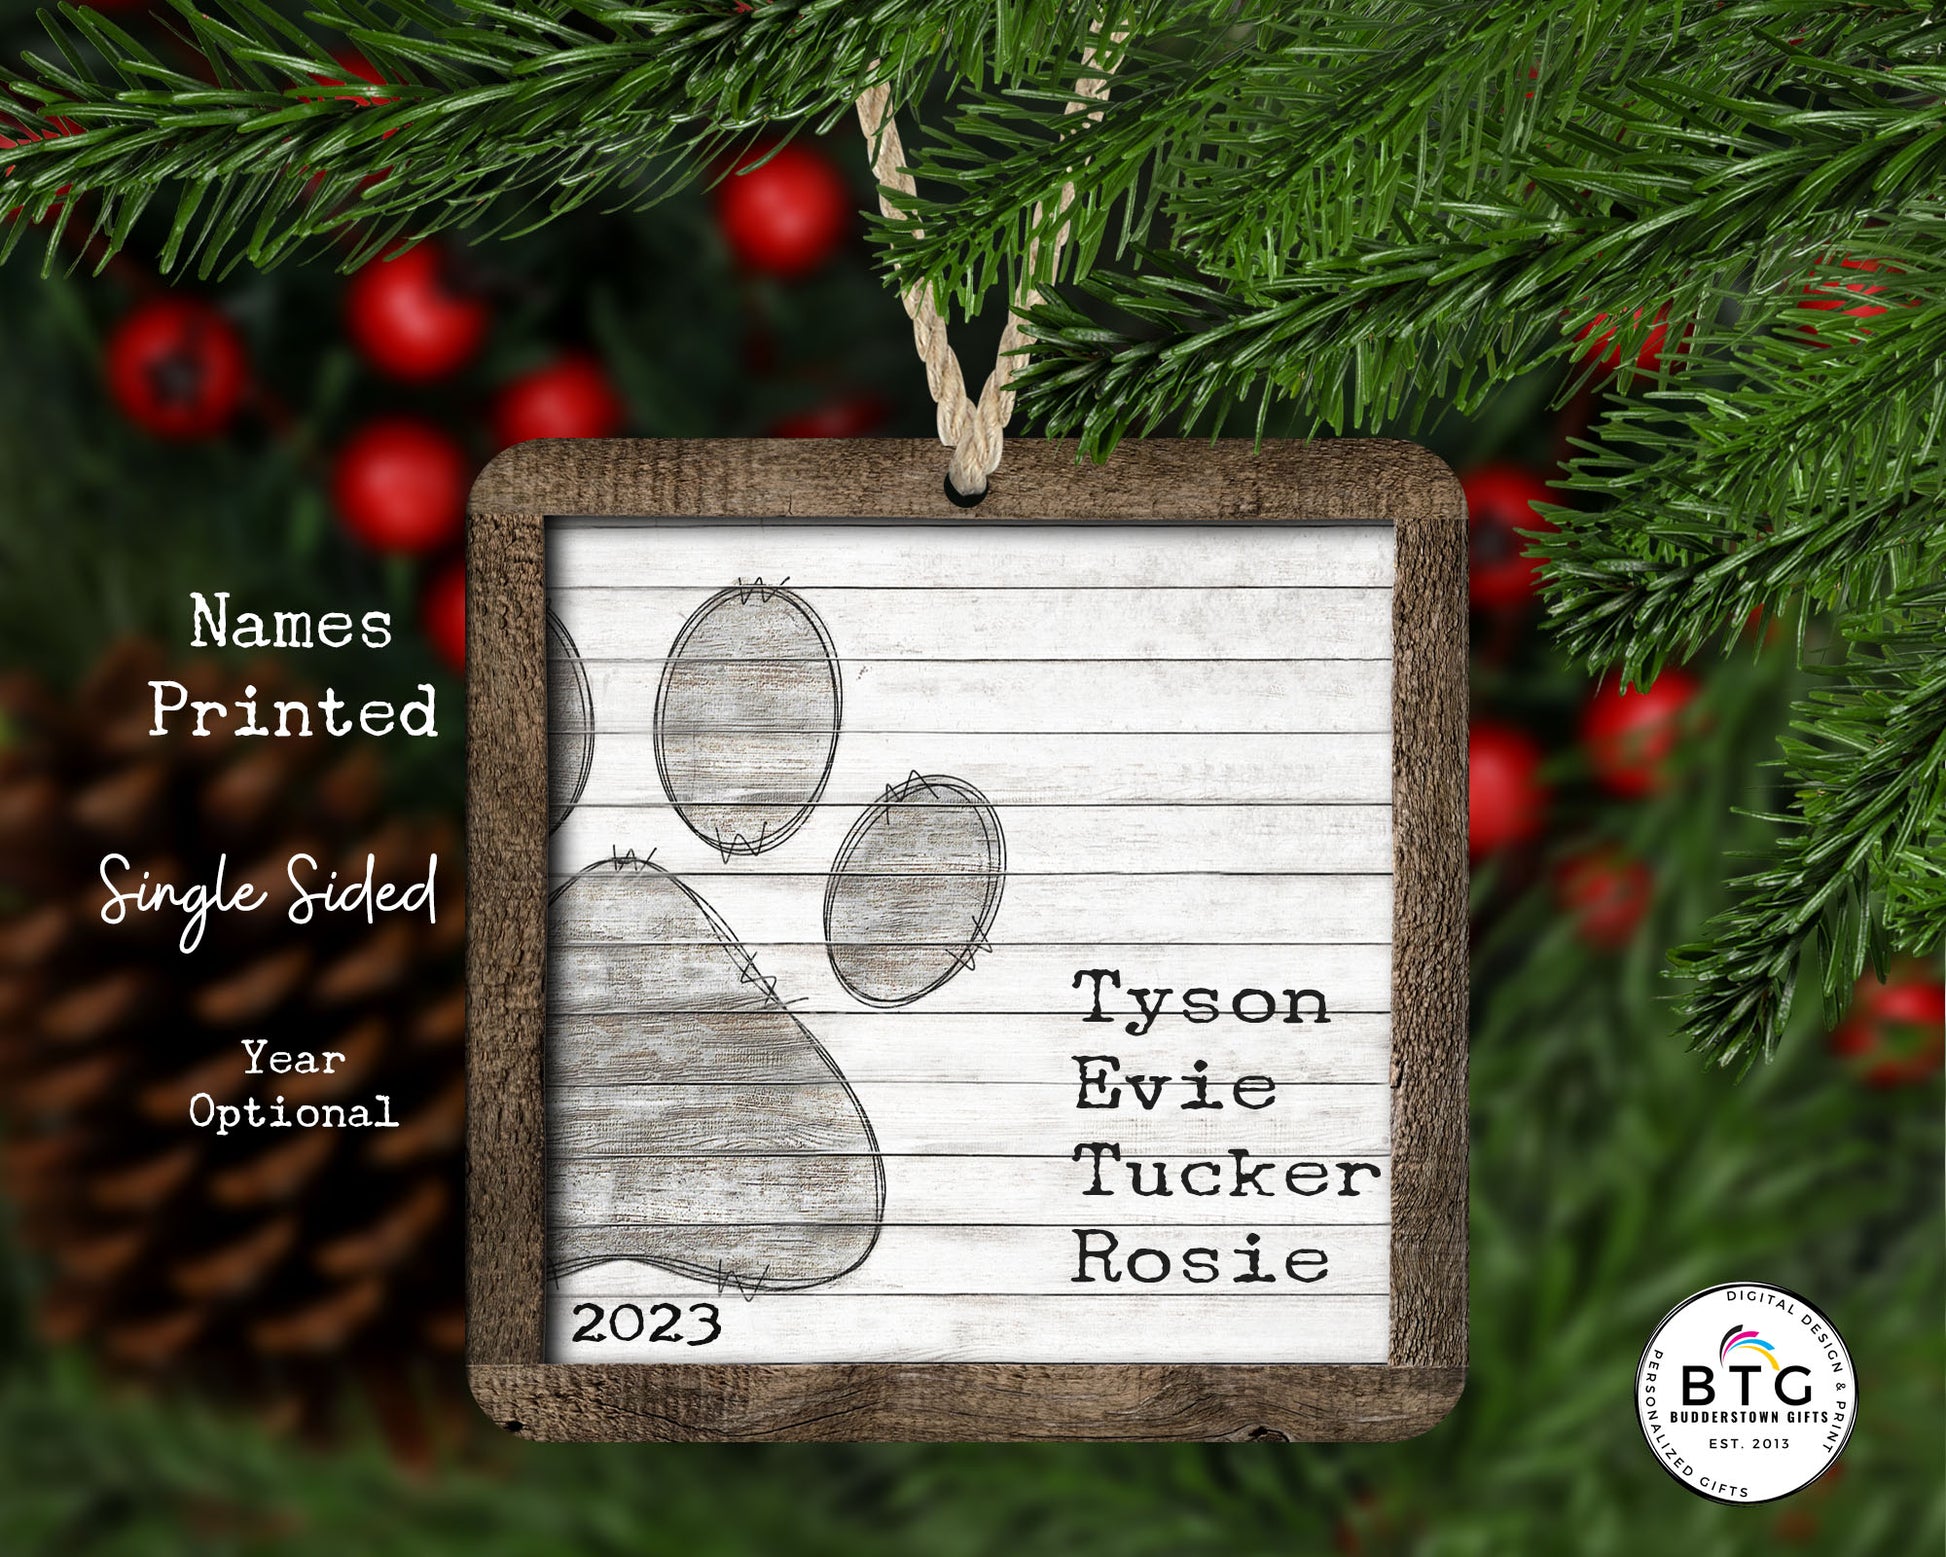 Pet Ornament, Personalized ornament for dog or cat